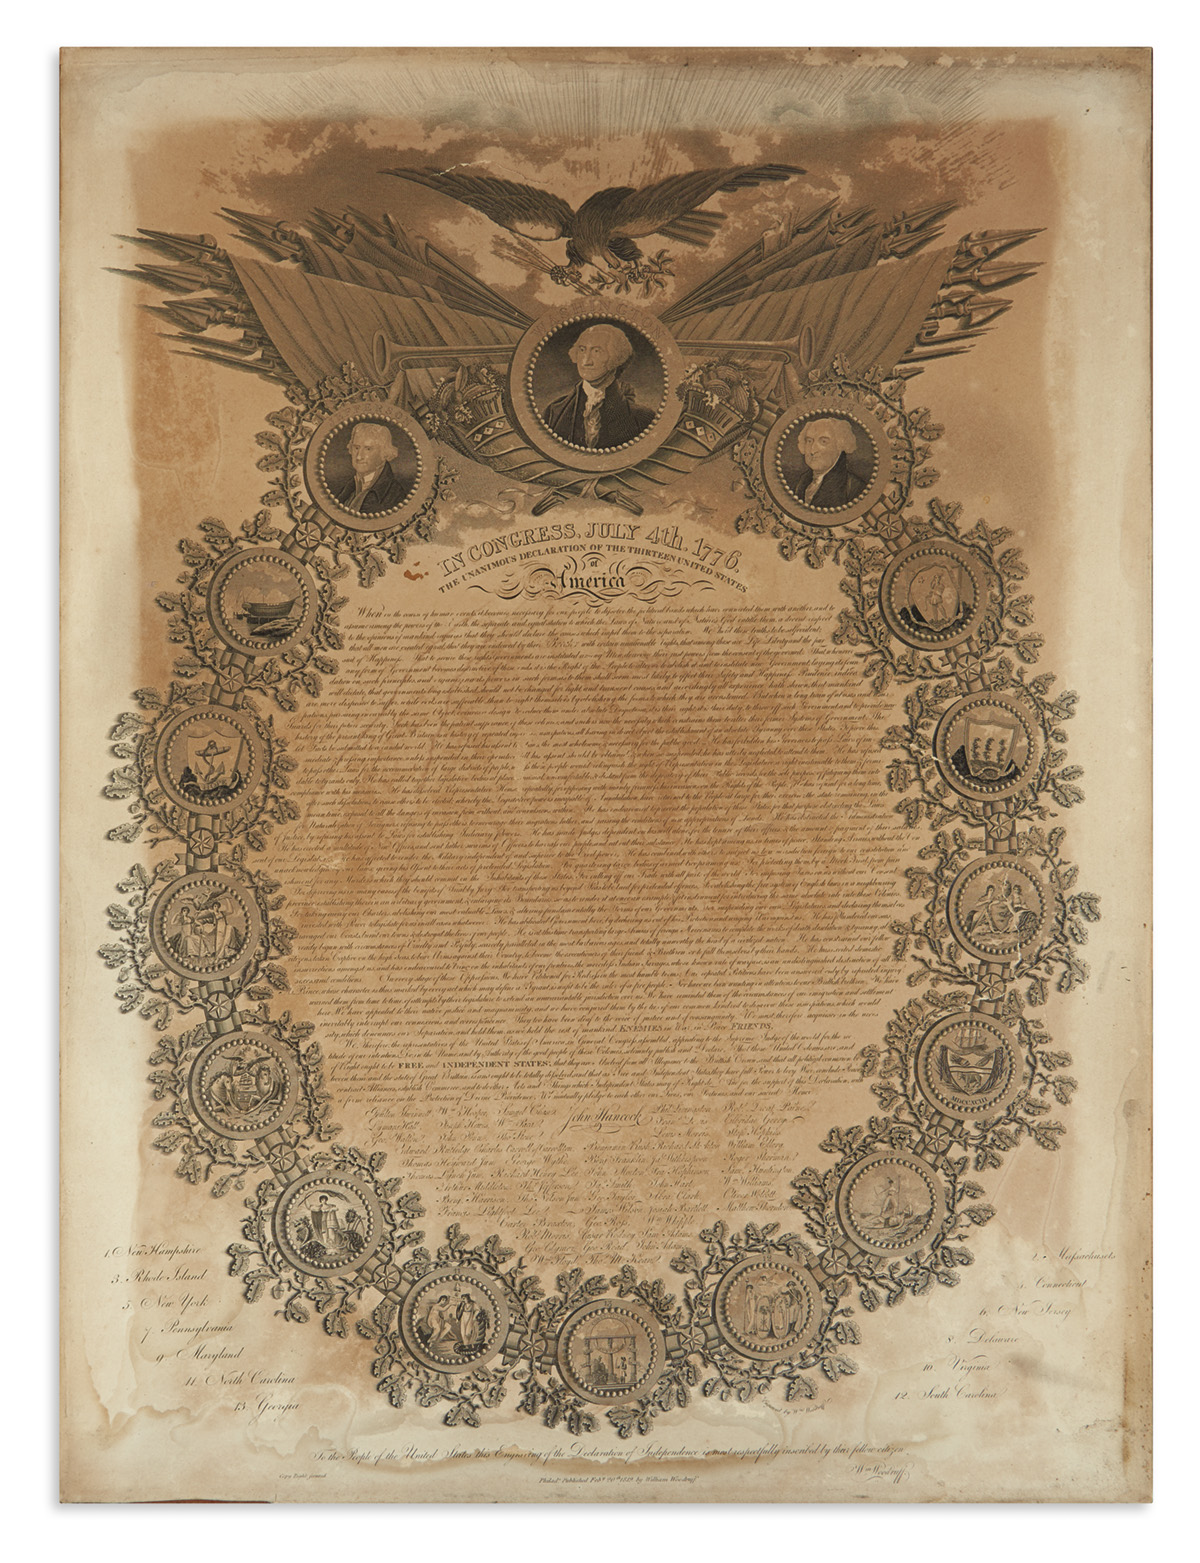 (DECLARATION OF INDEPENDENCE.) Woodruff, William; engraver. In Congress, July 4th, 1776. The Unanimous Declaration